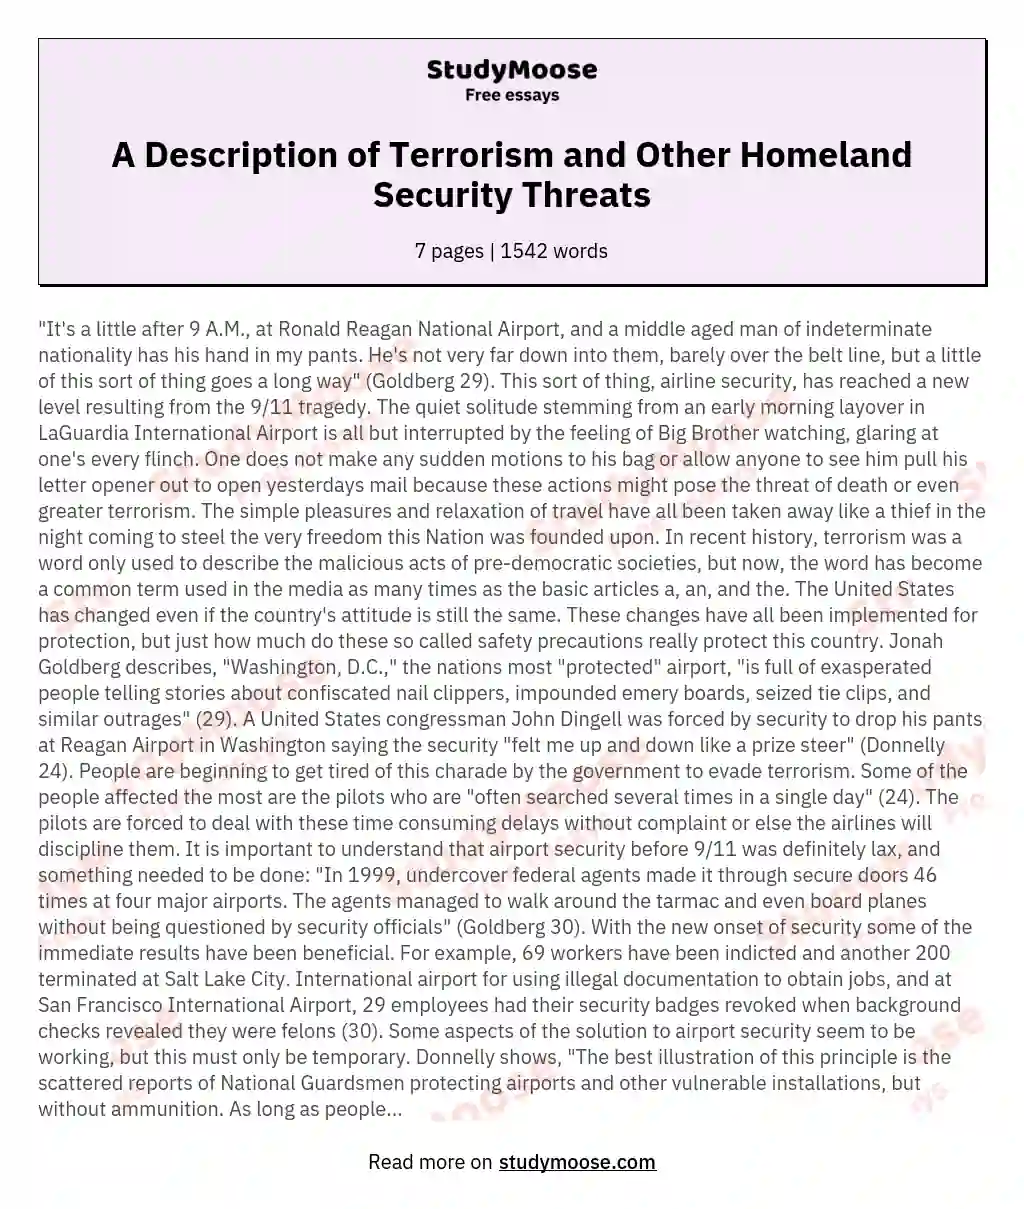 A Description of Terrorism and Other Homeland Security Threats essay